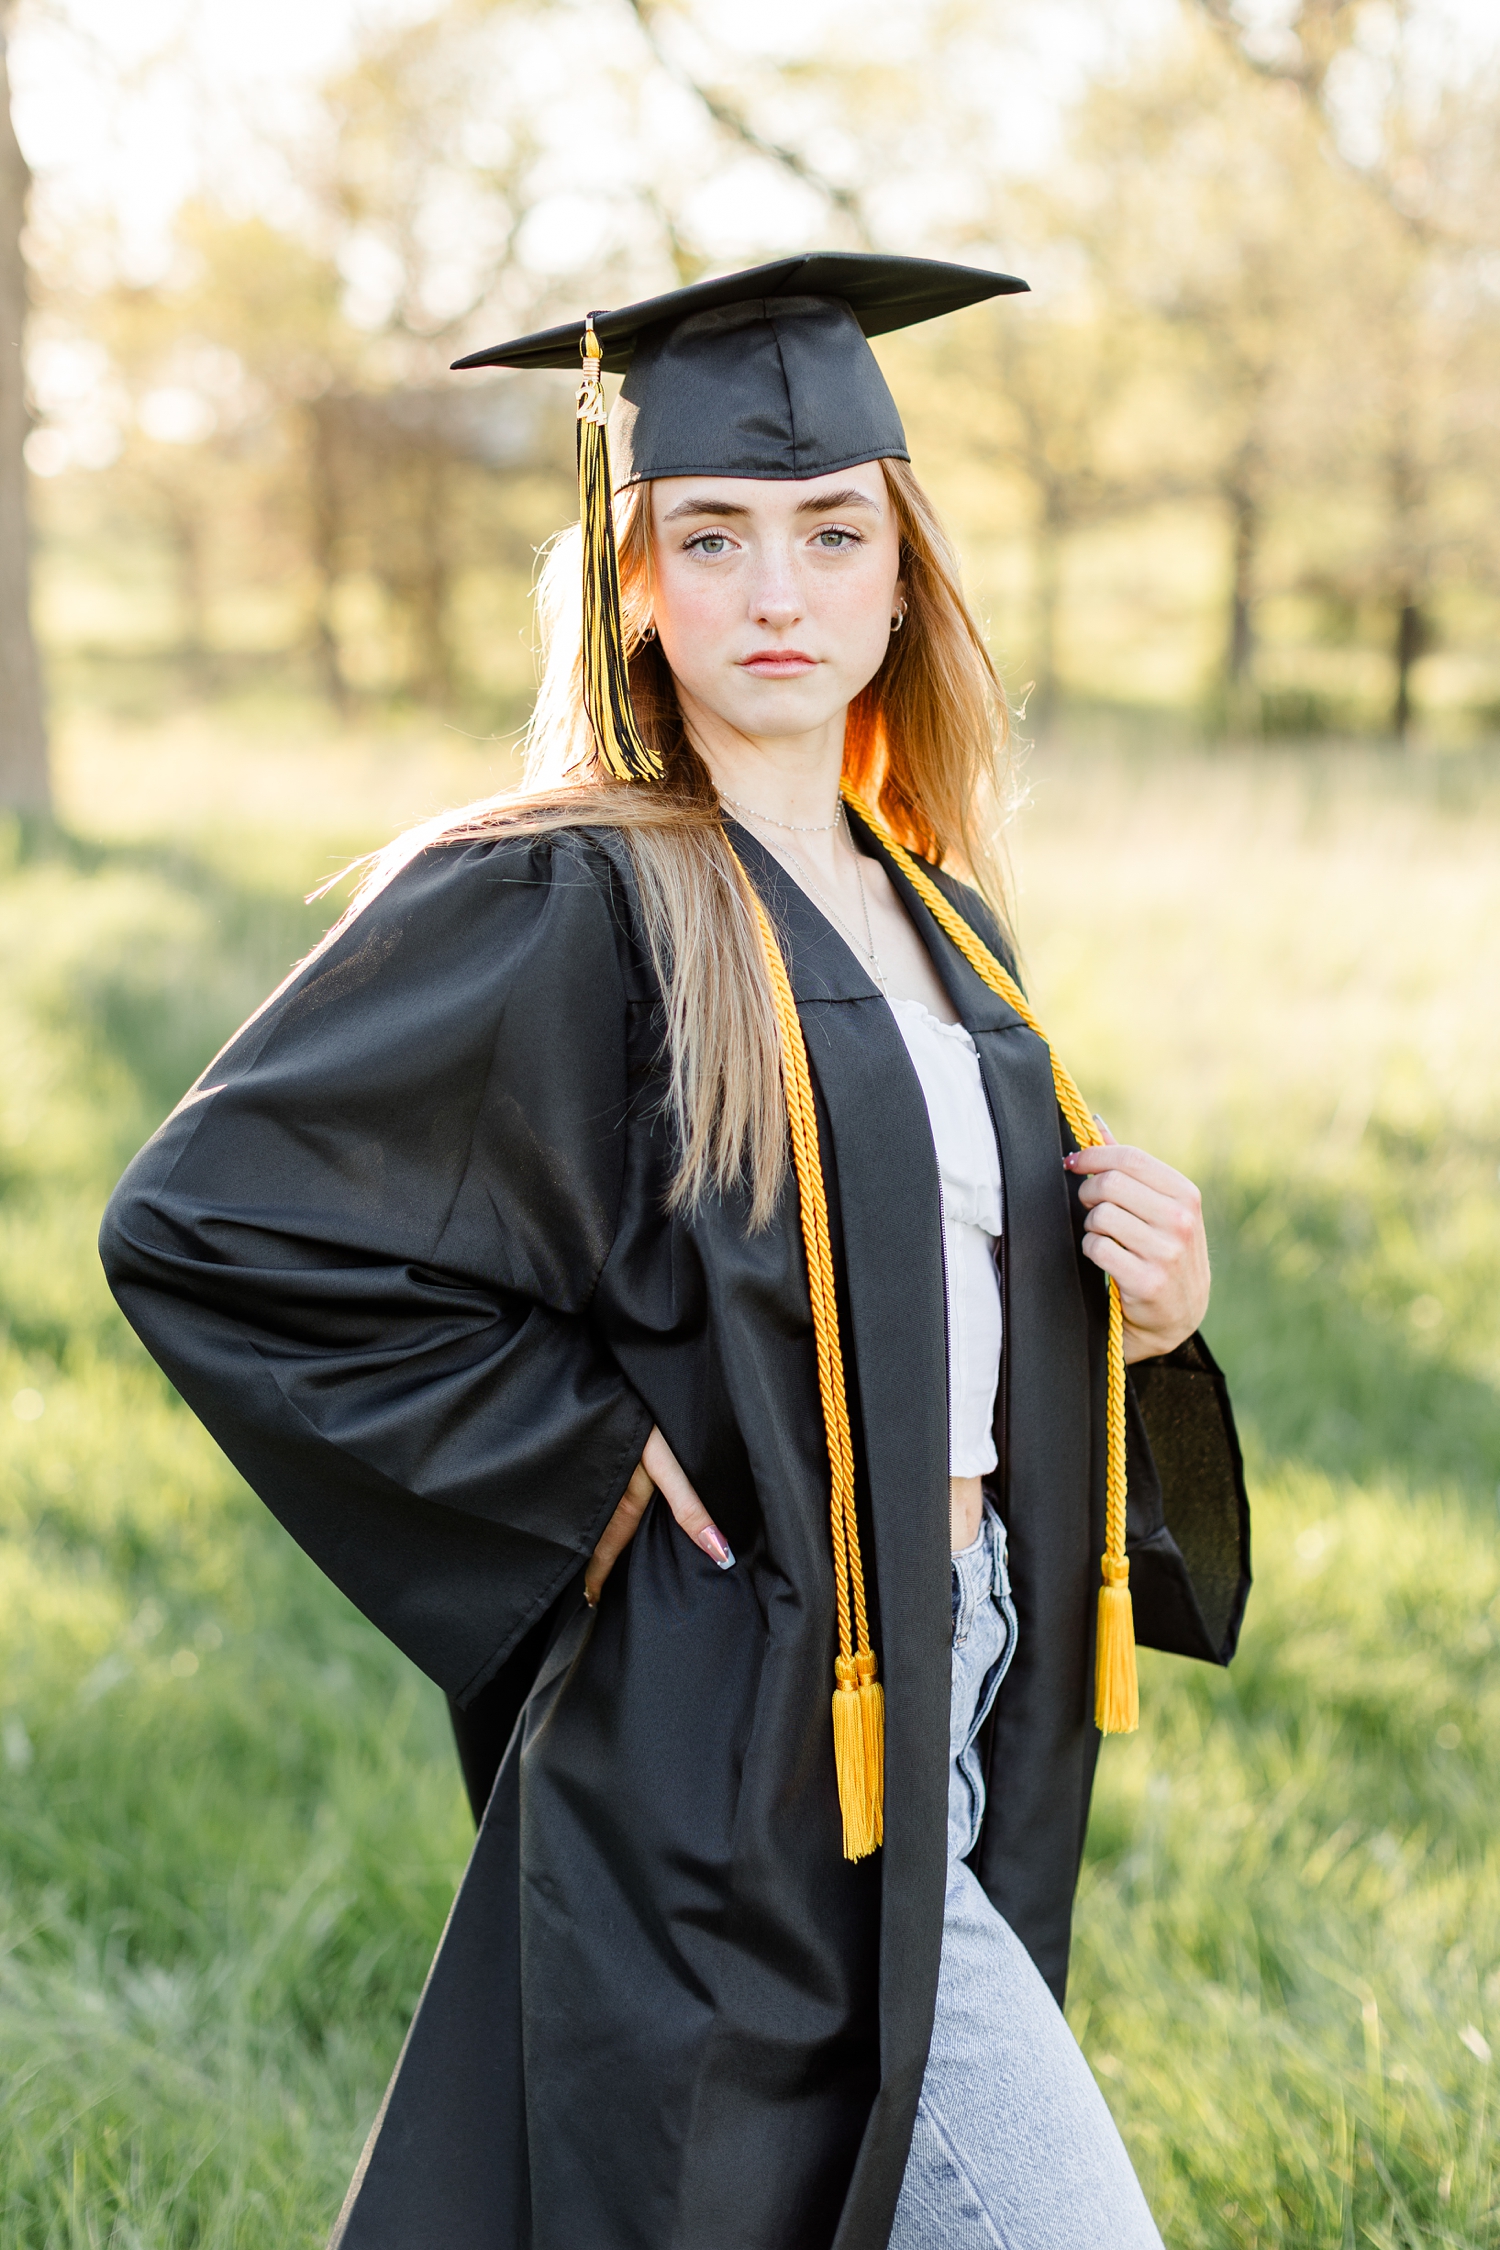 Reagan poses with her graduation cap and gown in a grassy pasture | CB Studio